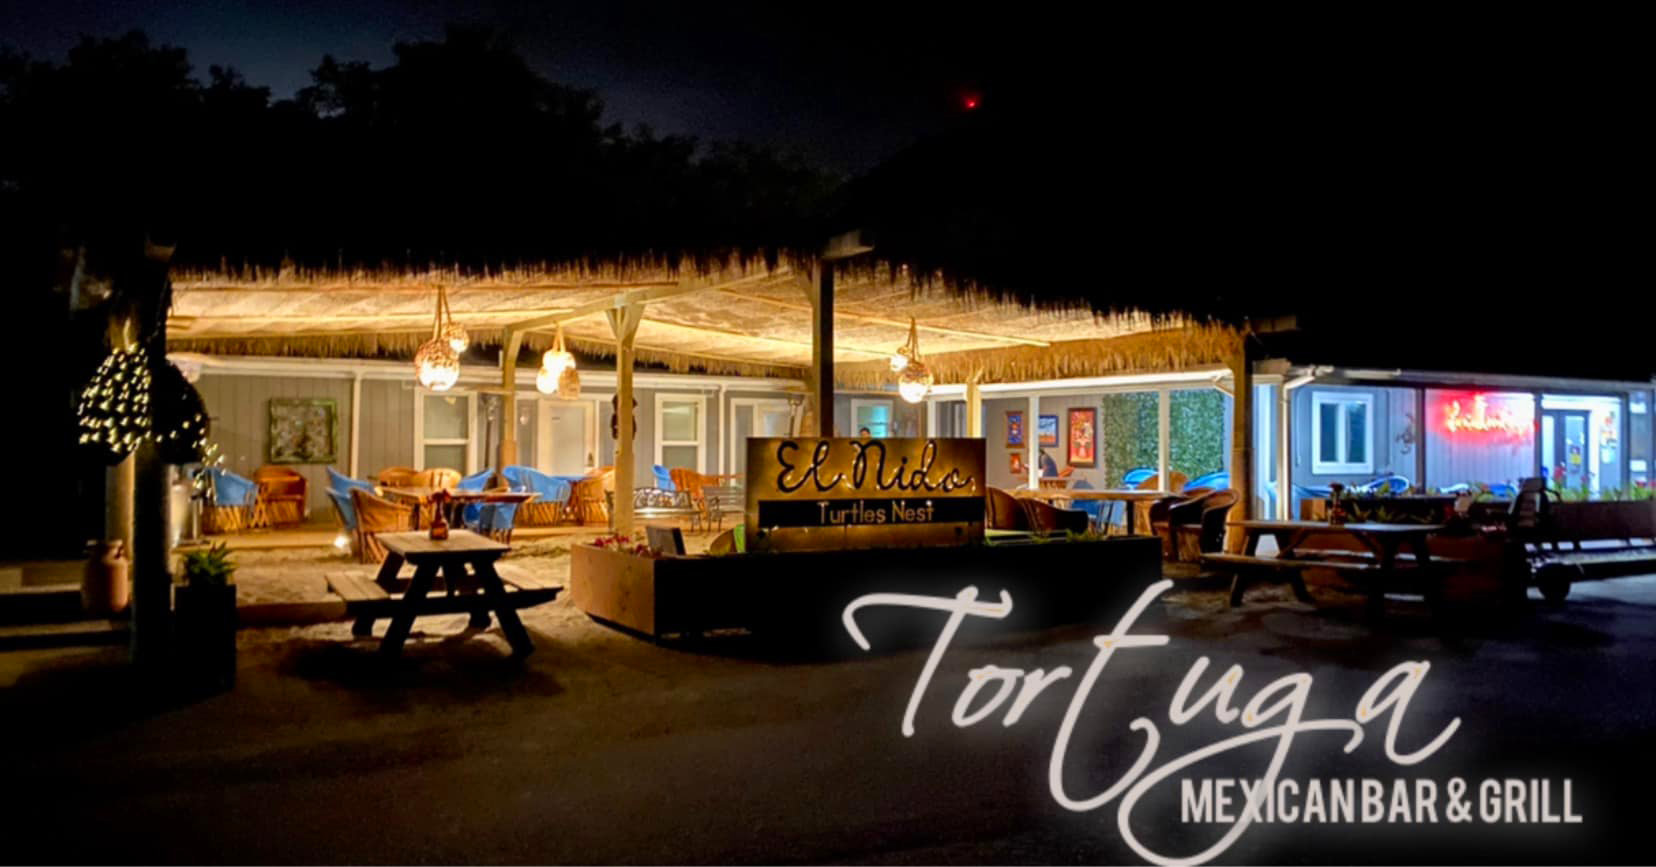 Tortuga Mexican Bar and Grill in Gold Beach, Oregon